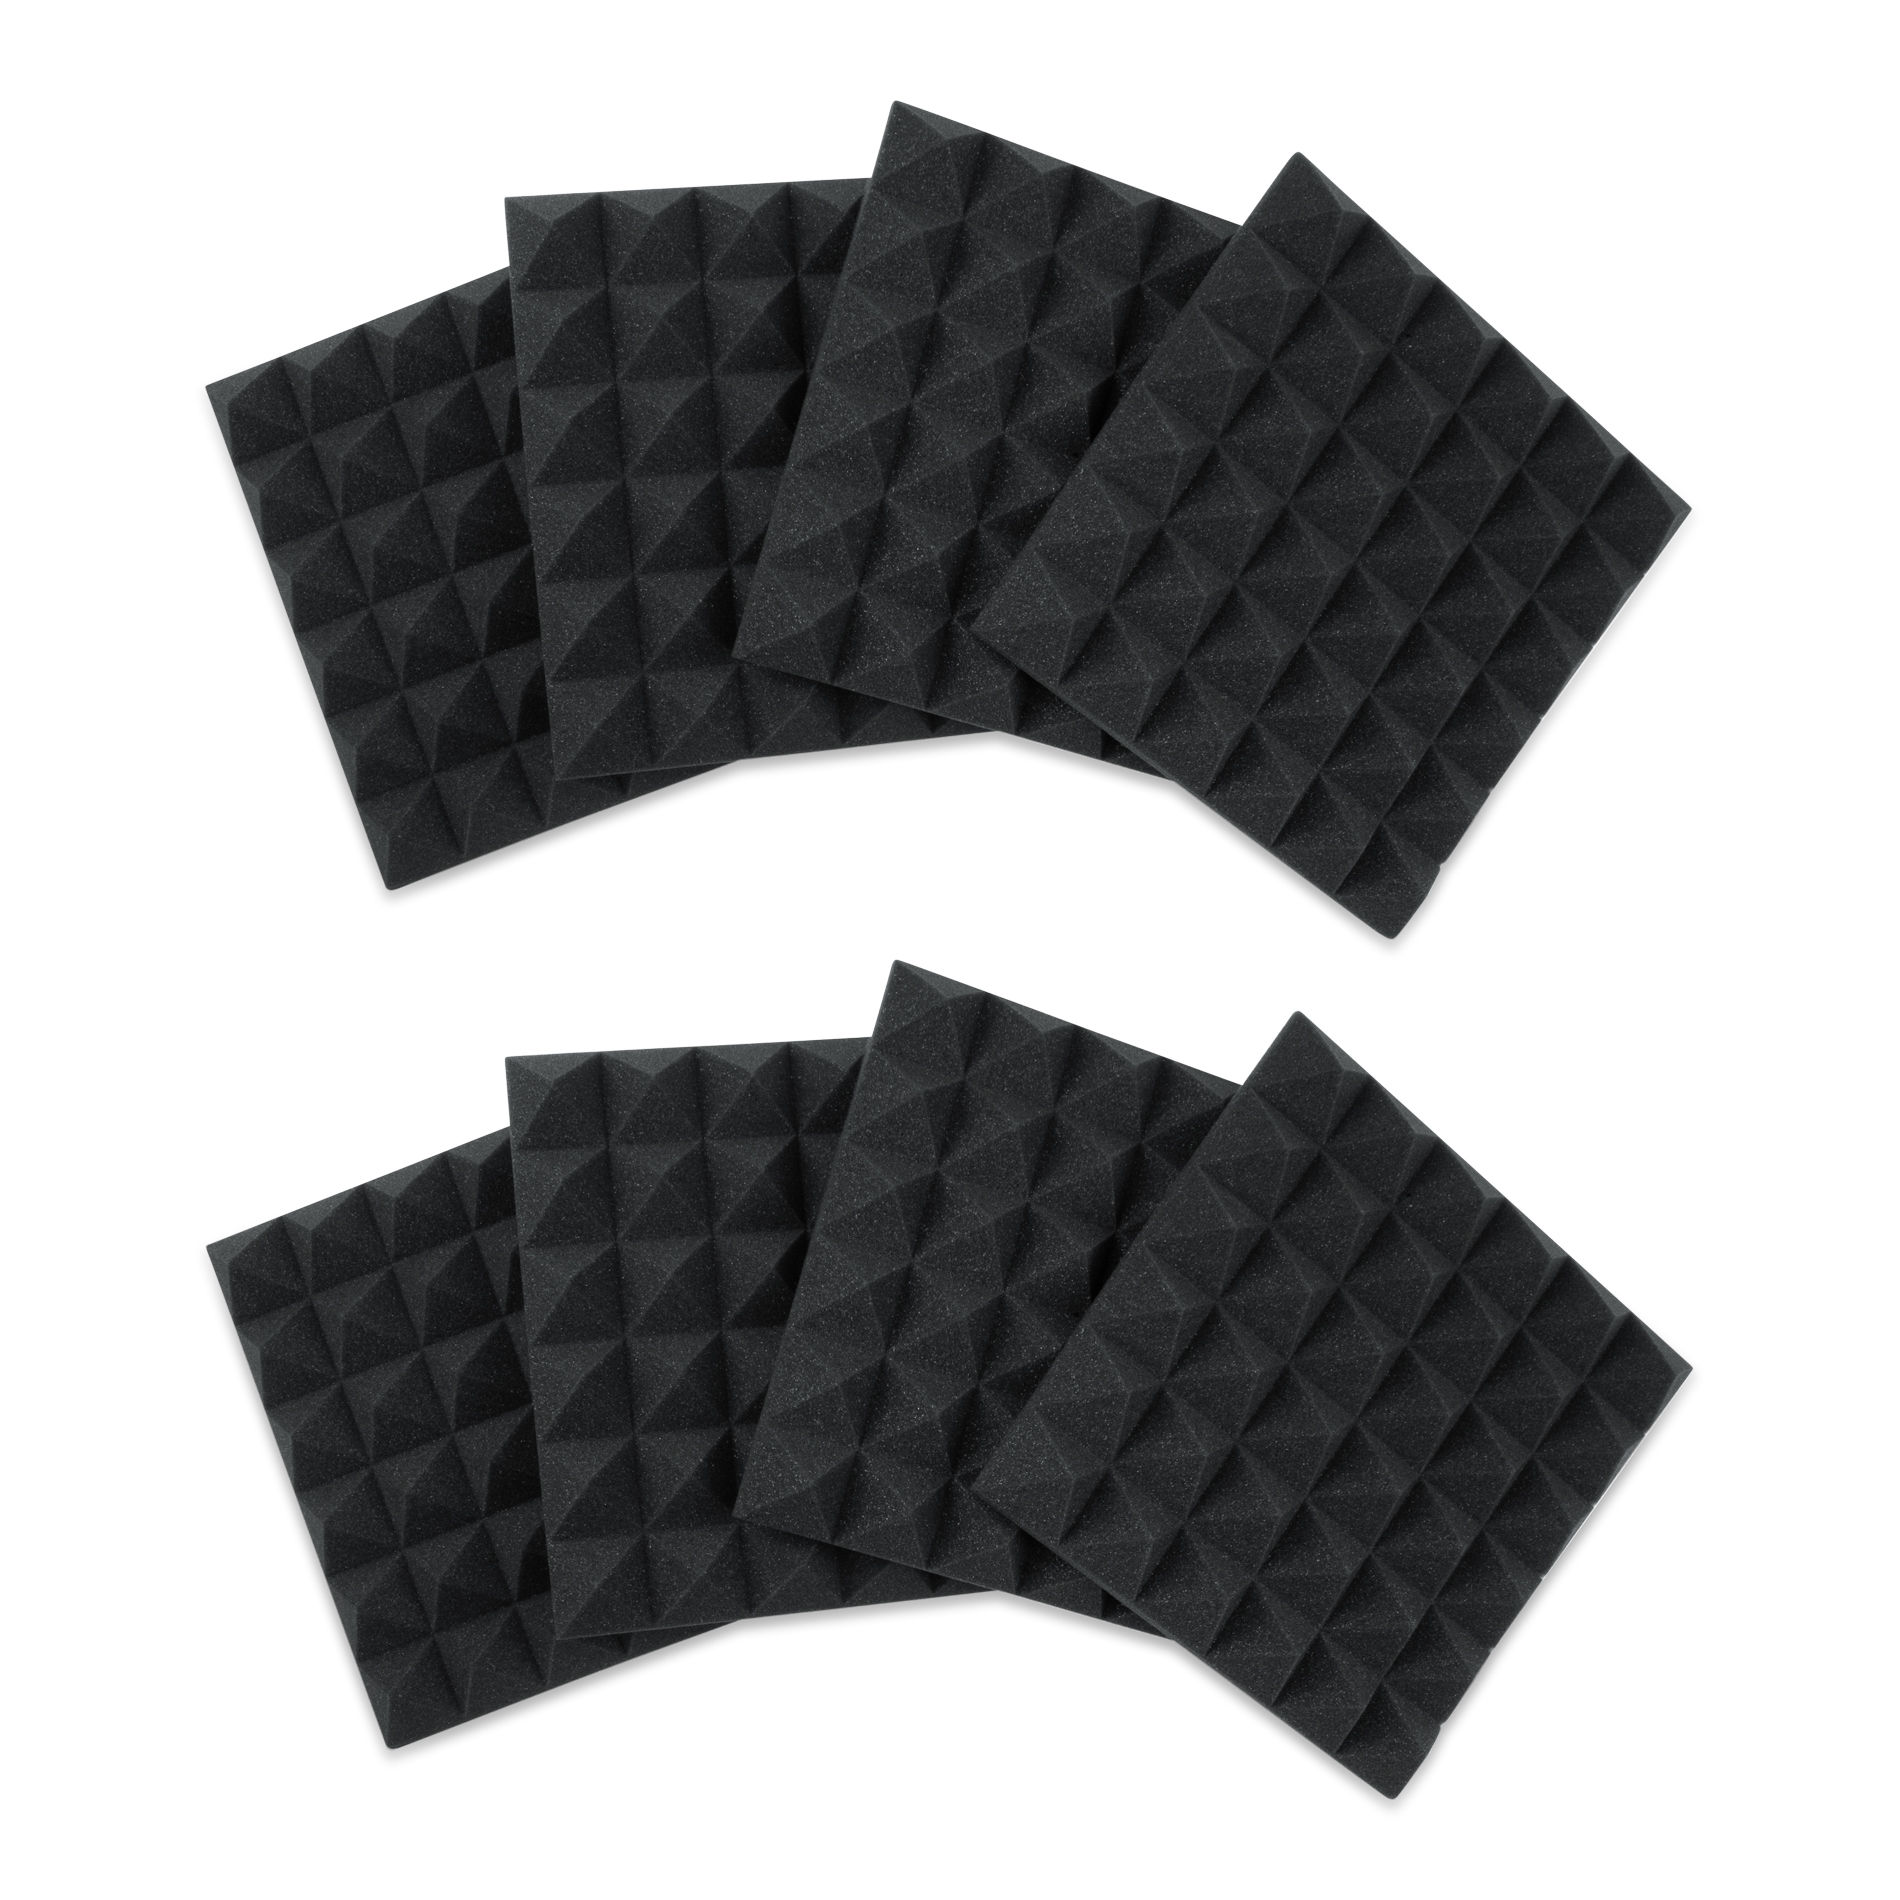  Black Gator Board - 1/2 Thickness - Multiple Sizes - 10  Pieces - 10 pc Multi Pack - Rigid Foam Backing Board (8 x 10) : Office  Products